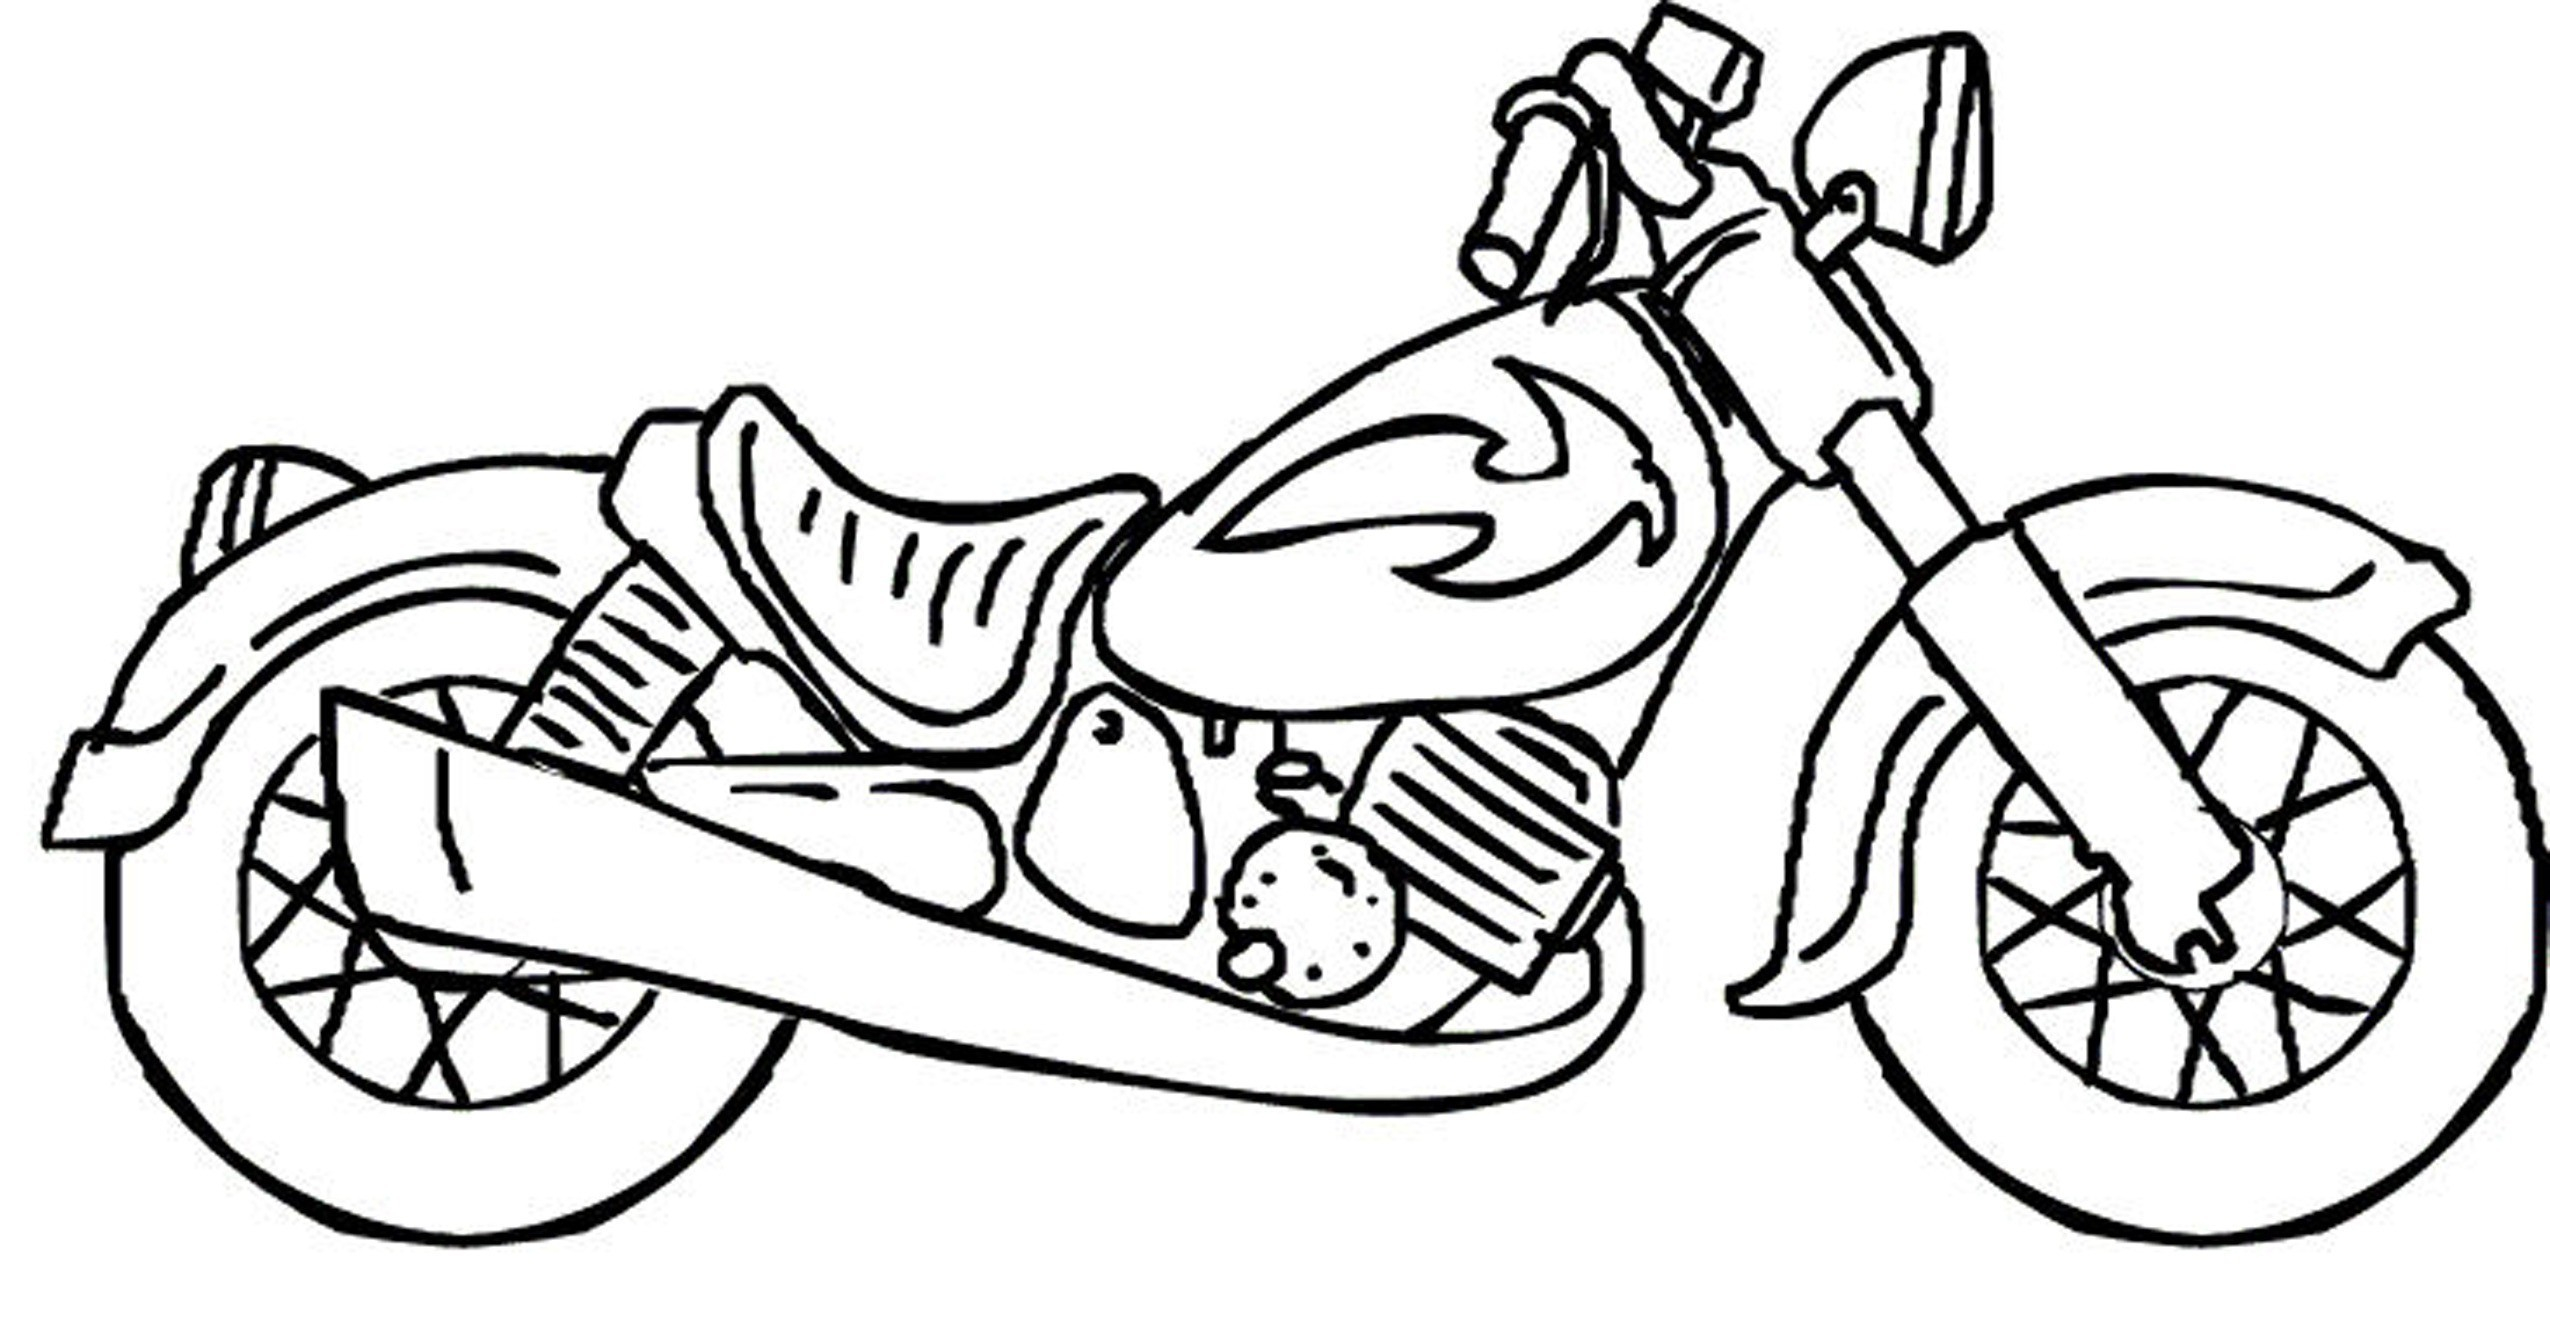 Coloring Pages | Cool Coloring Pages Boy New Best Motorcycle Elegantee  Harley Davidson Dirt Bike For Kids